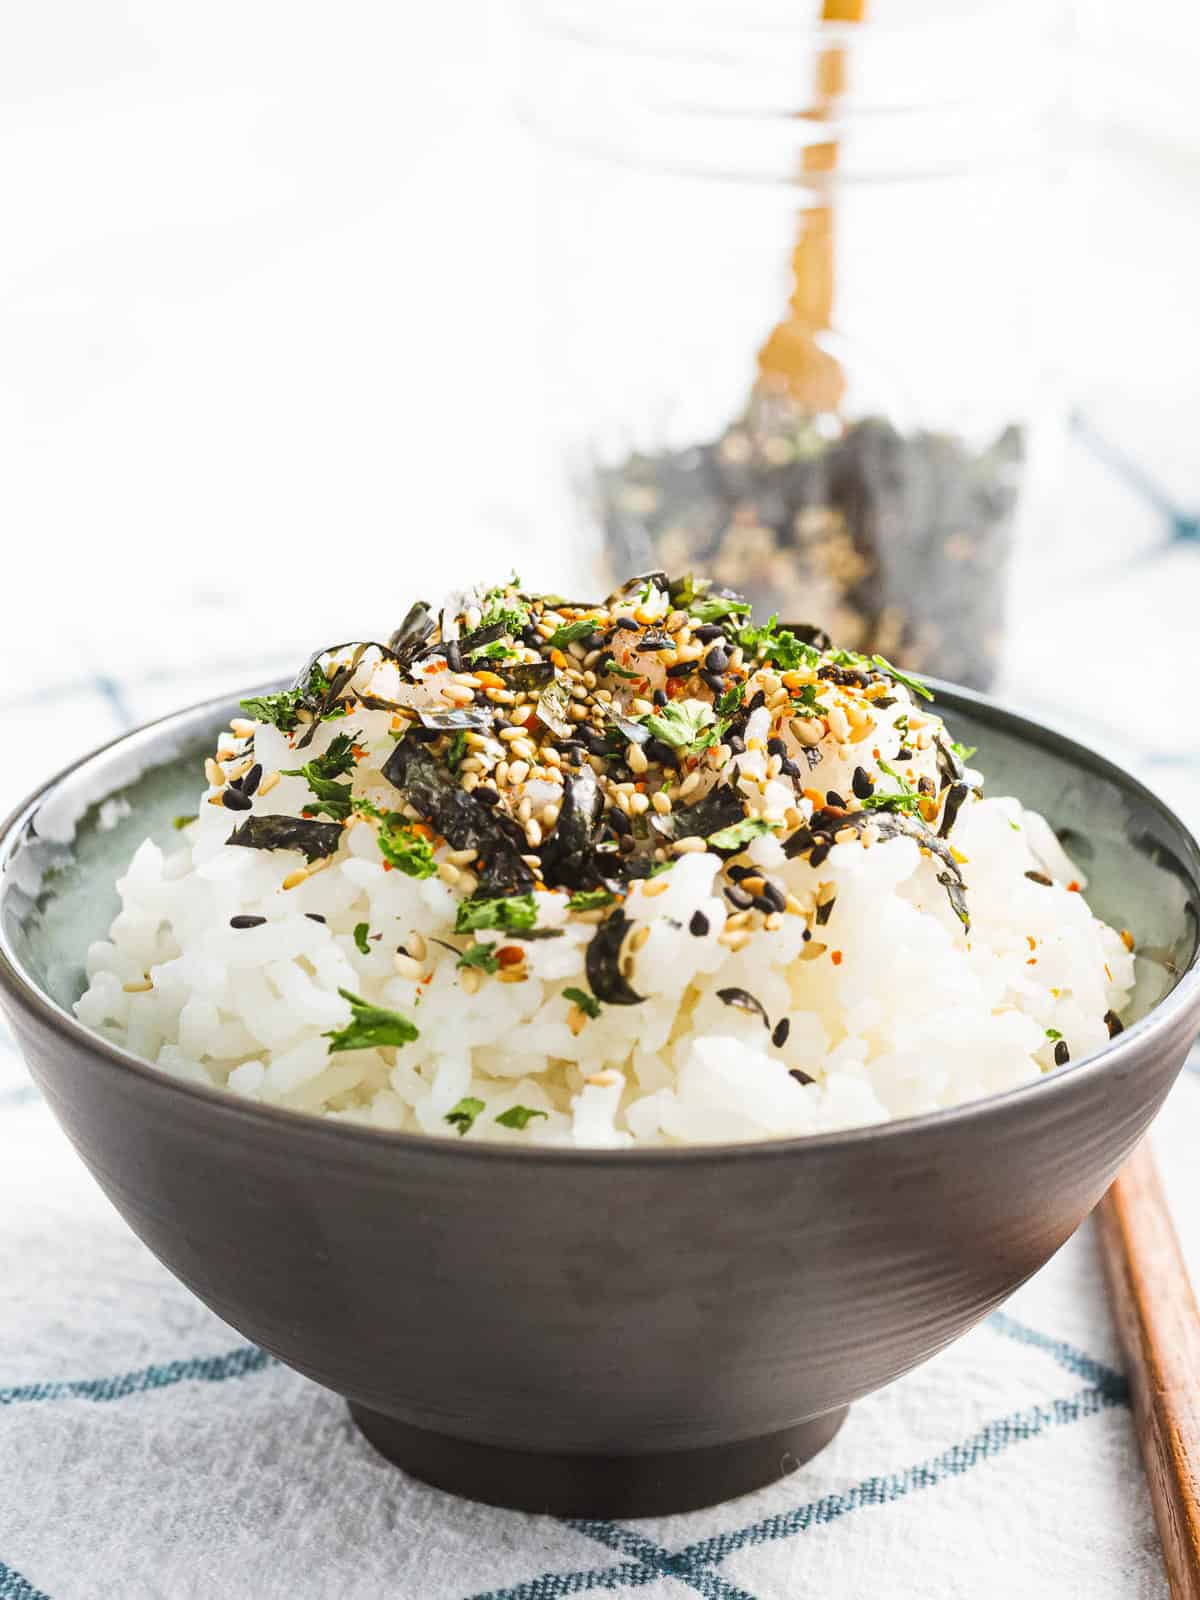 Nori komi furikake with nori and sesame seeds sprinkled on a bowl of steamed rice.